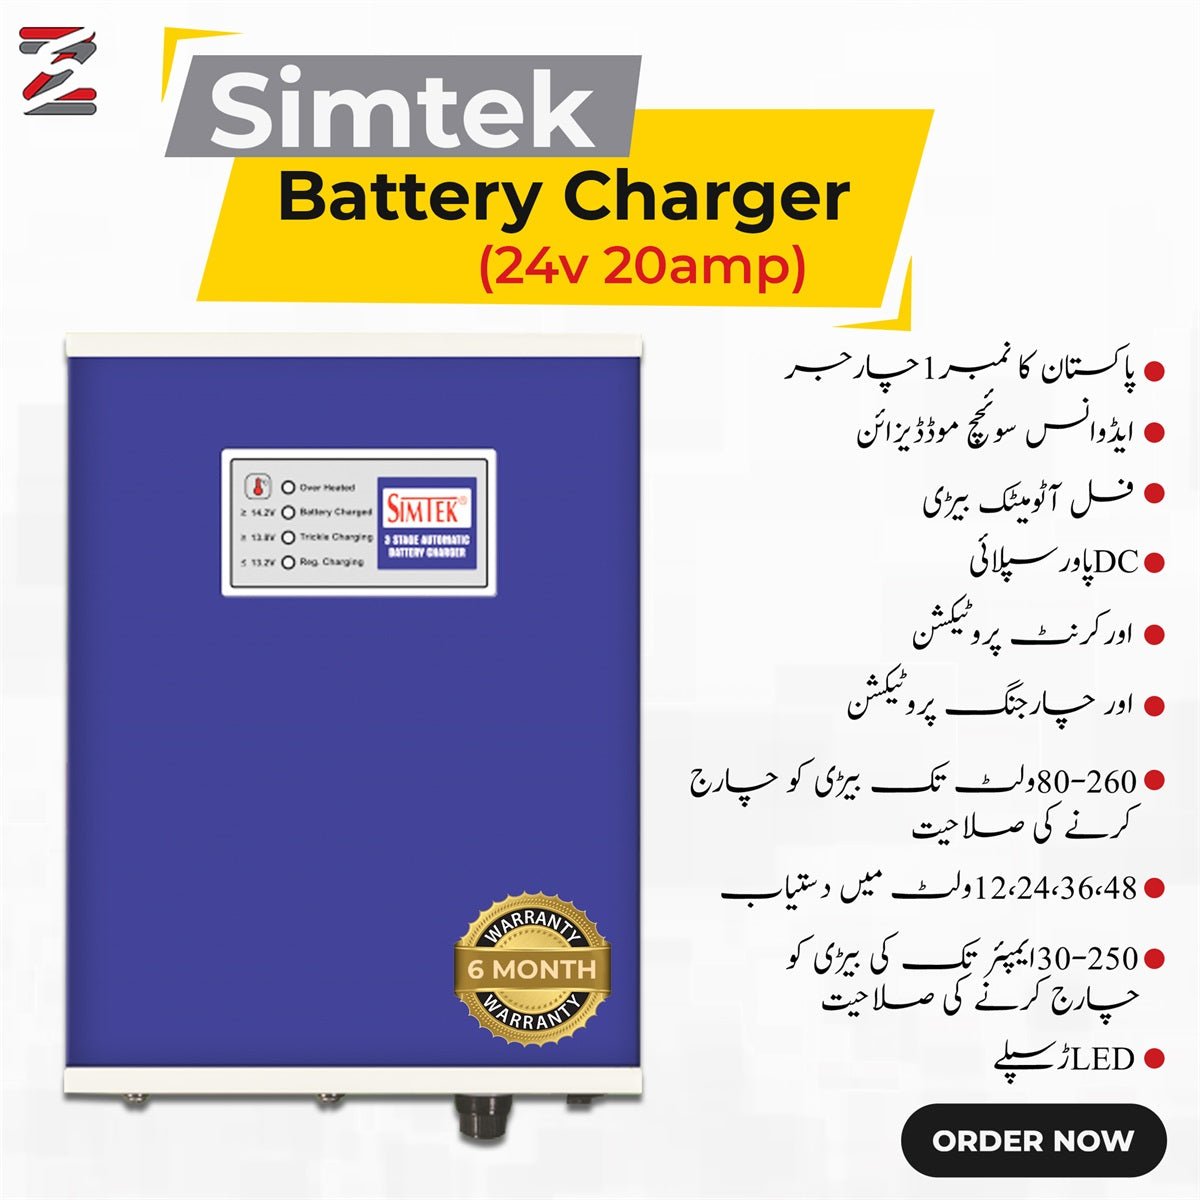 Simtek Battery Charger 24V 20ampBuy Simtek Best Battery Charger in Pakistan, Hyderabad, Karachi. We Provide Online at the best price with online Technical Support. Repairable &amp; with a Warranty Simtek Battery Charger 24V 20AMPZam Zam Store